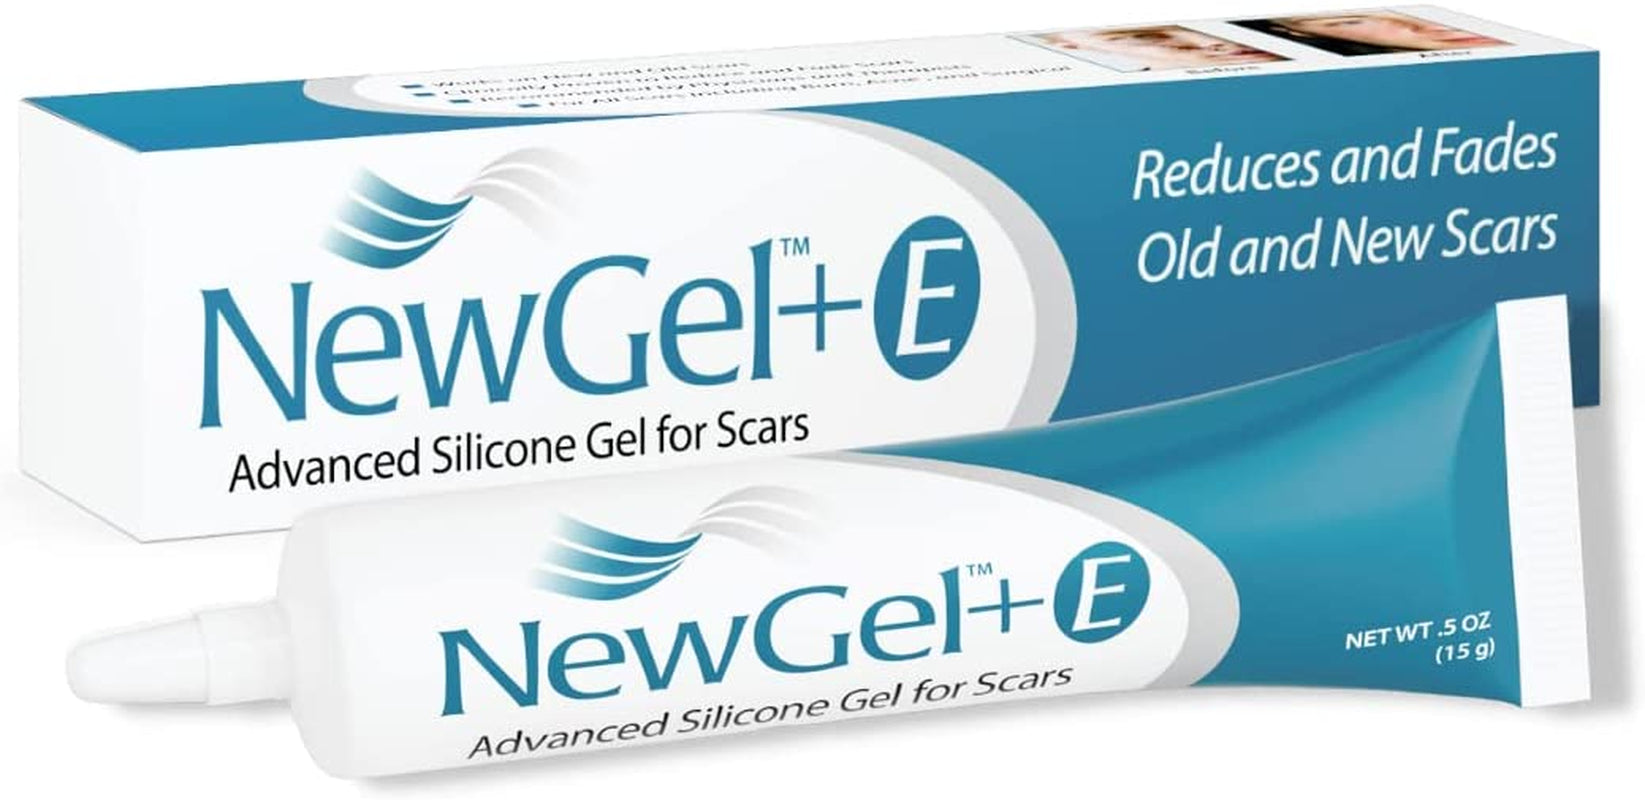 Newgel+E Advanced Silicone Scar Treatment Gel for OLD and NEW Scars W Vitamin E, for Surgery, Injury, Keloids, Burns, and Facial Blemish Scars (15 Grams)